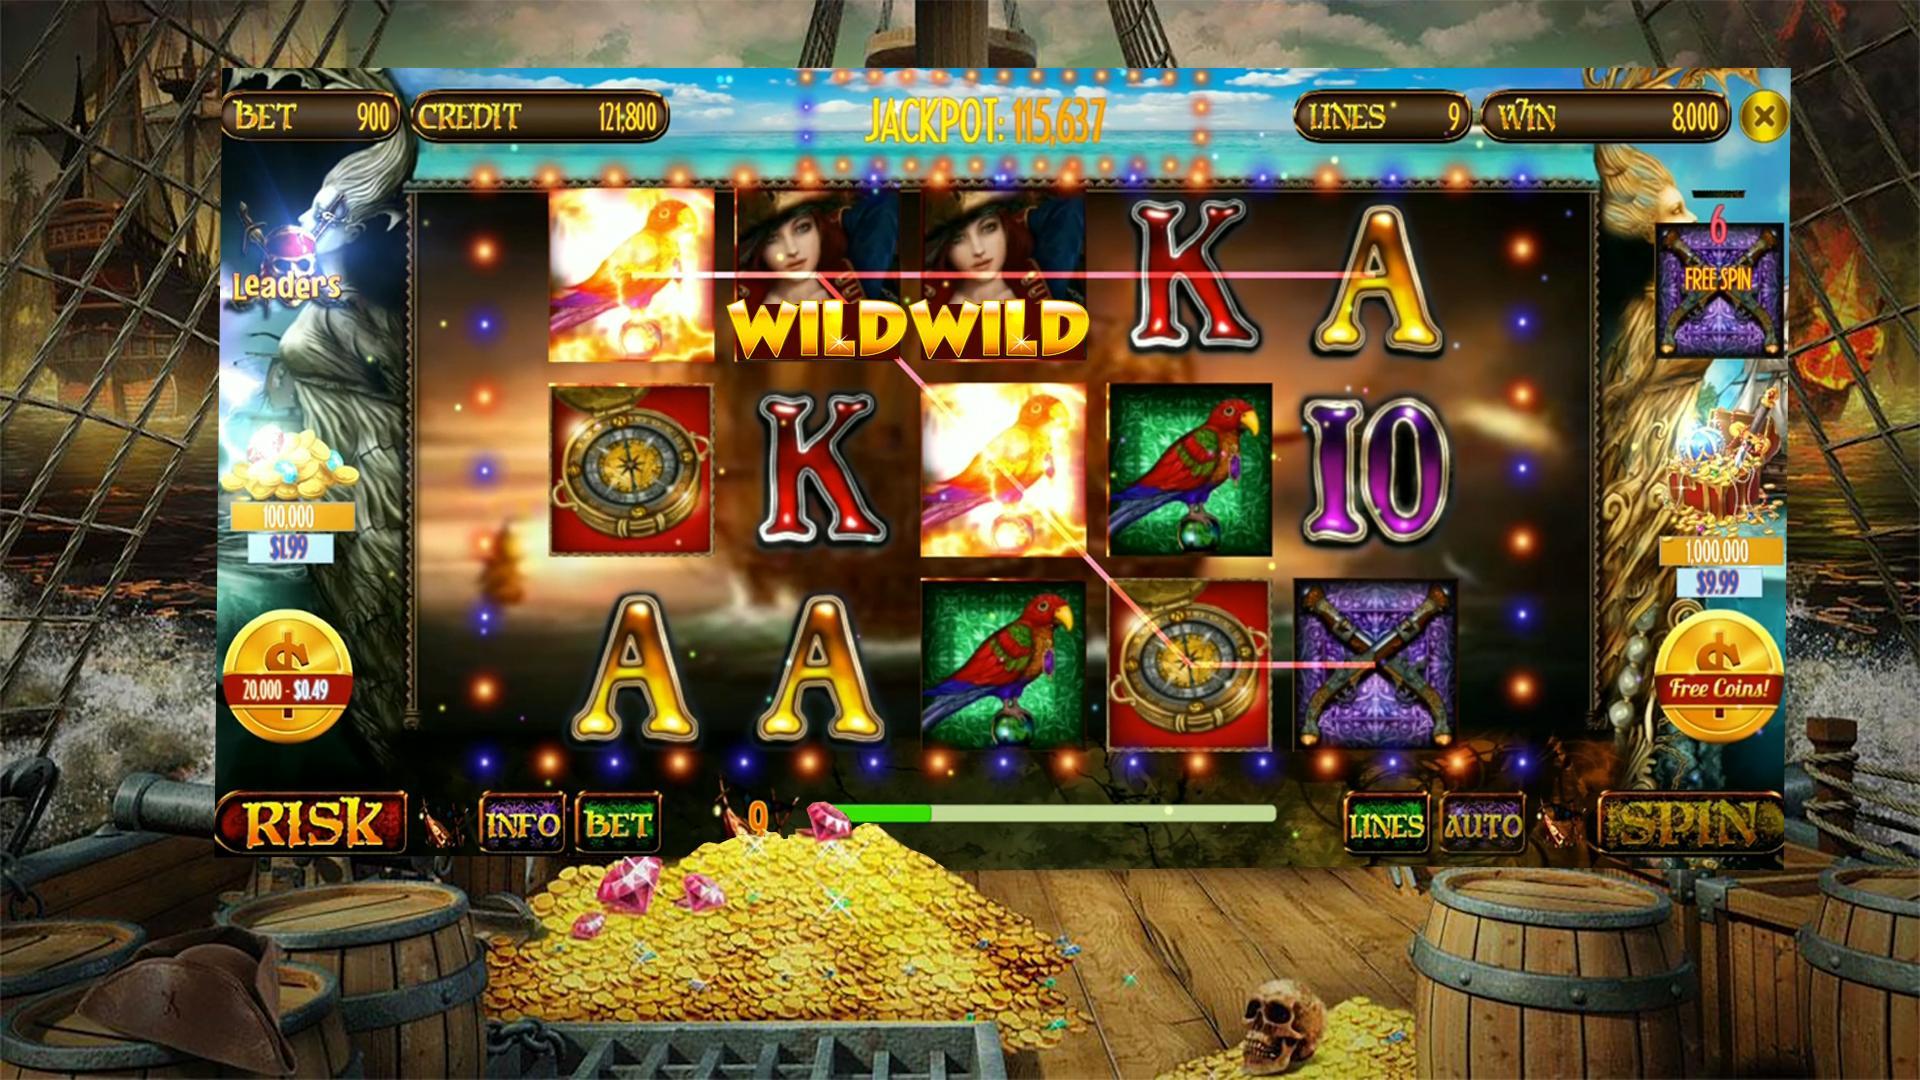 are there any online casinos that pay real money